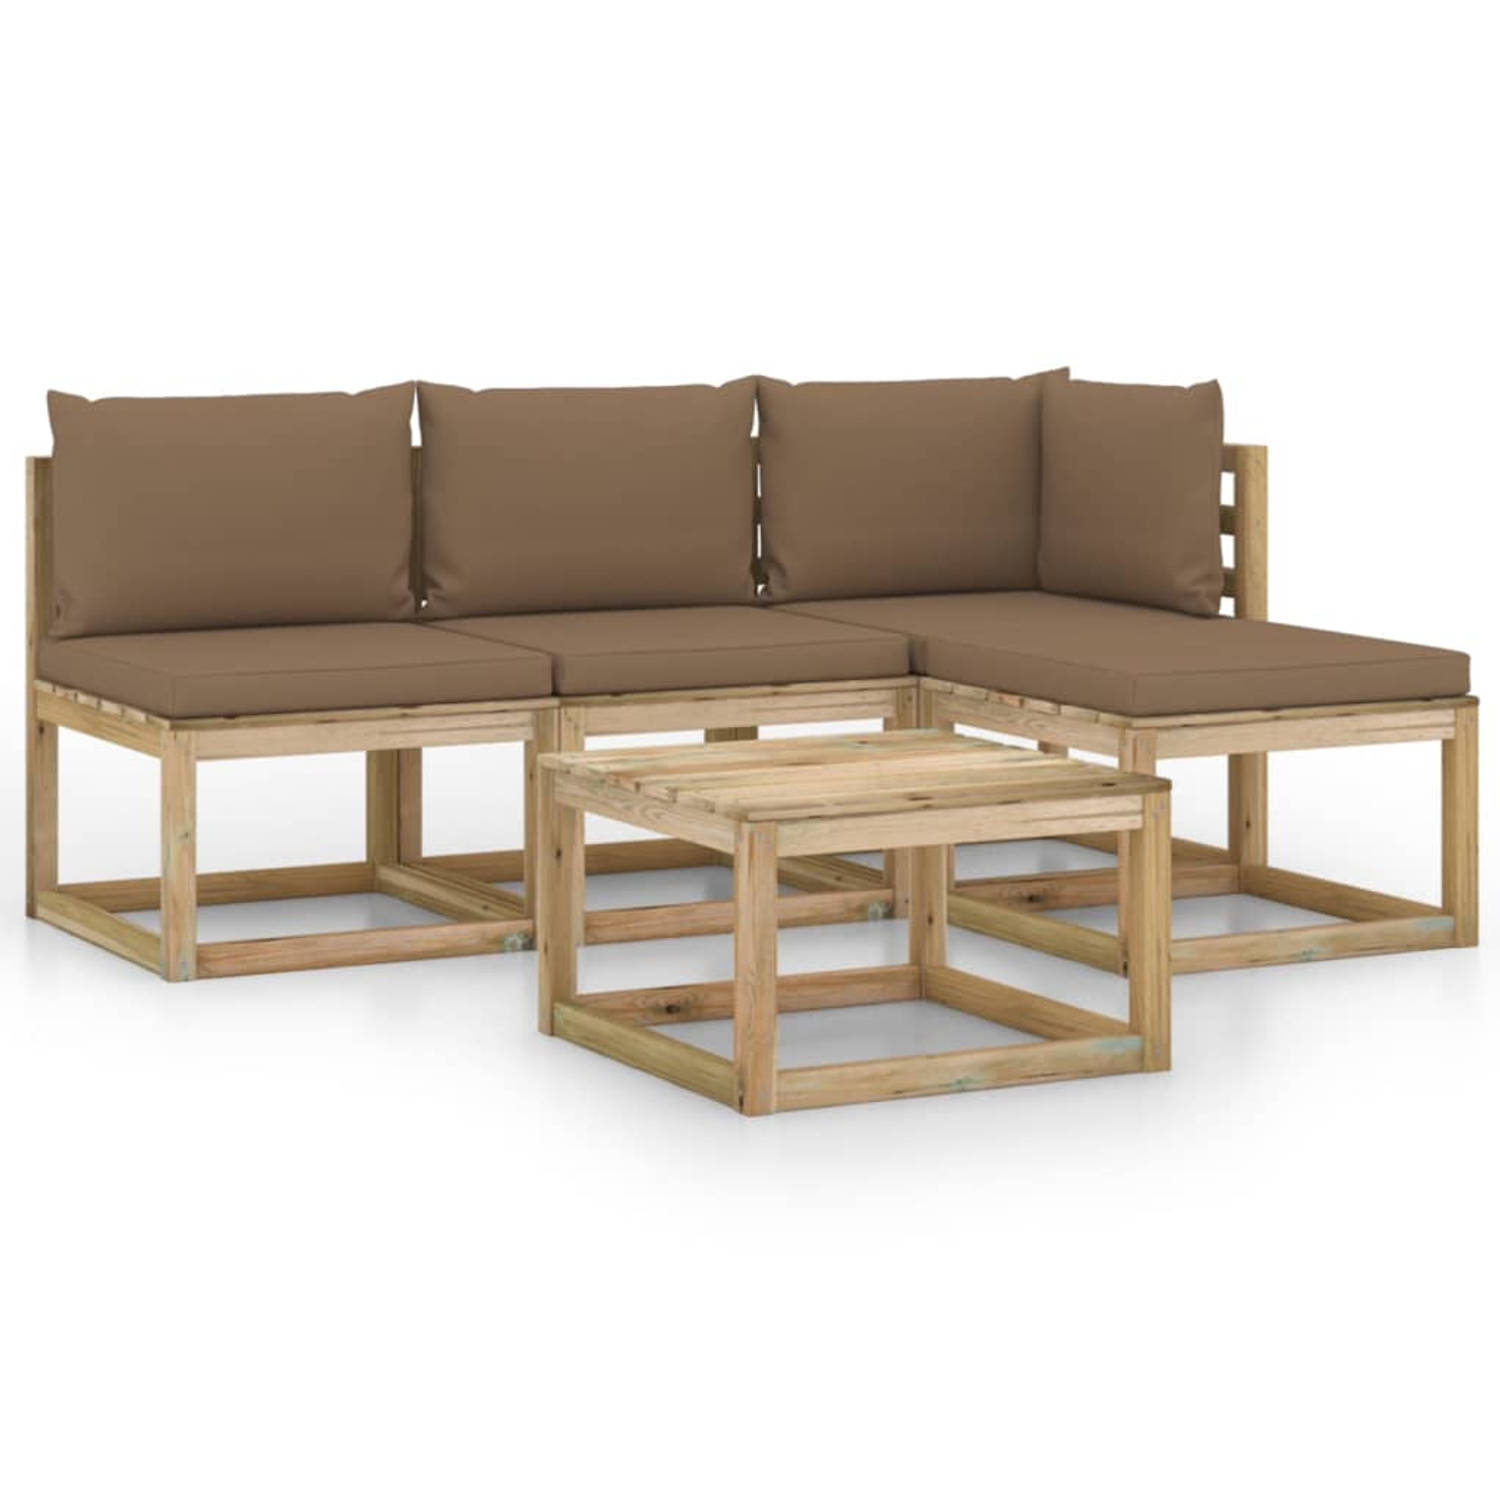 The Living Store Tuinset - Houten - Grenenhout - Taupe - 64x64x70 cm - Inclusief kussens